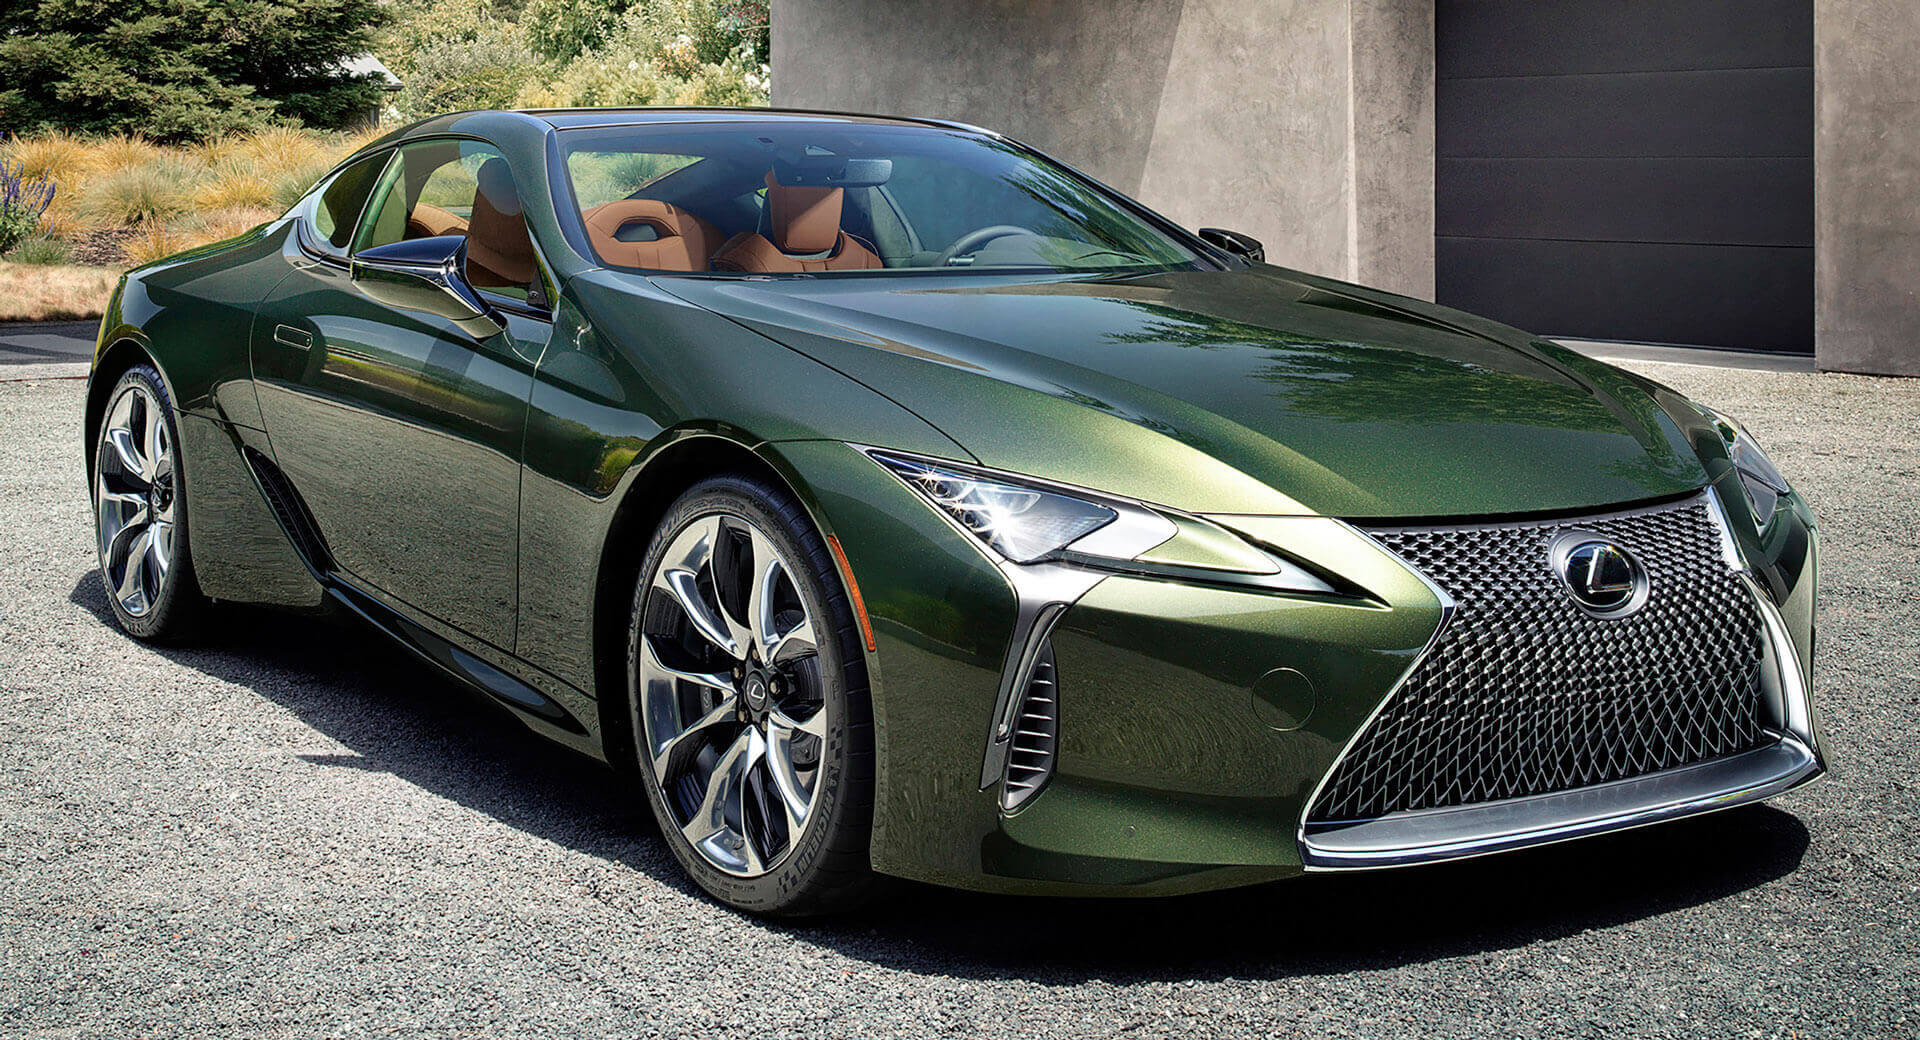 2020 Lexus LC 500 Goes "Green" With Inspiration Series